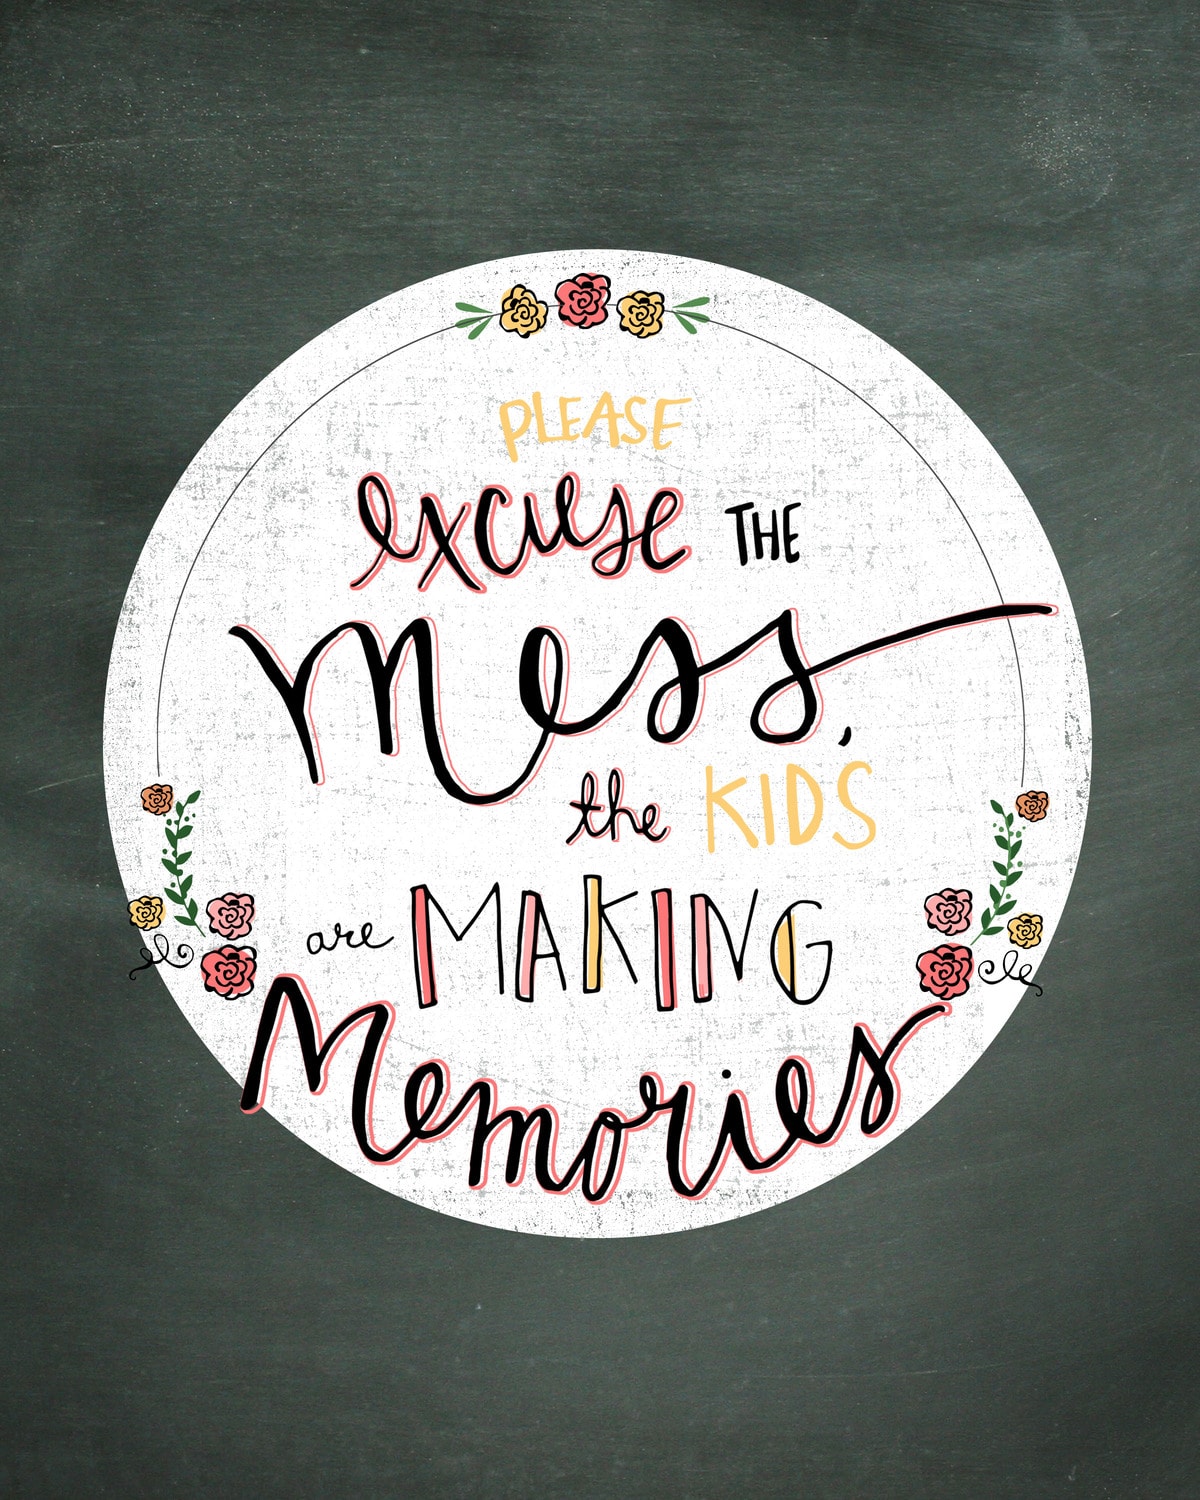 Please excuse the mess, the kids are making memories - LOVE this quote!! Free print and 3 versions on { lilluna.com } Great as a gift or decor in your home!